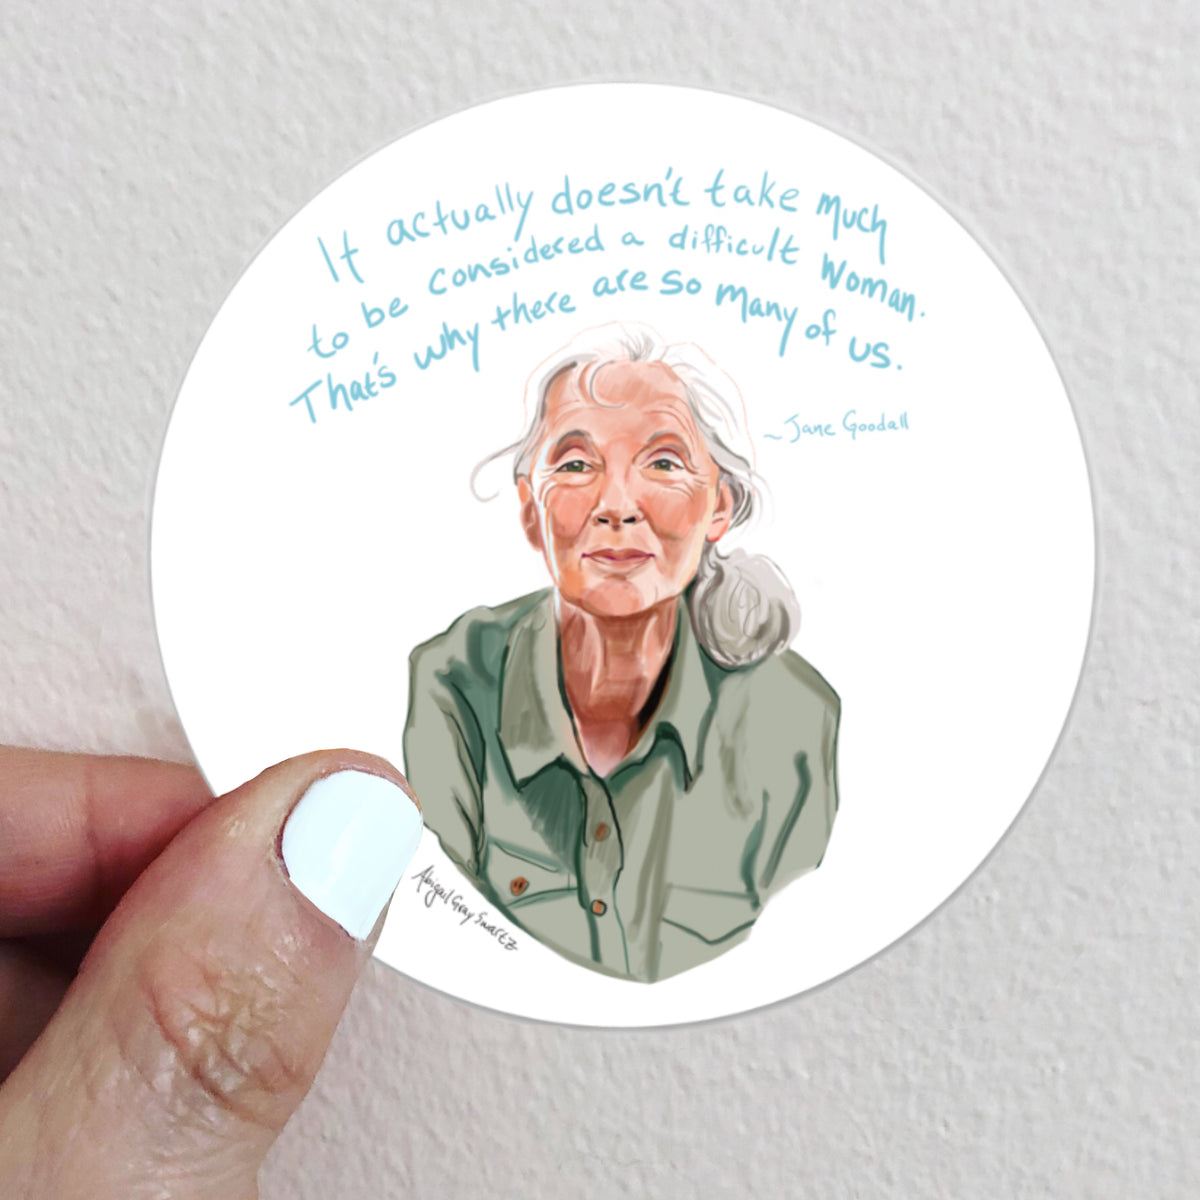 Jane Goodall quoted portrait sticker. “It actually doesn&#39;t take much to be considered a difficult woman. That&#39;s why there are so many of us.”